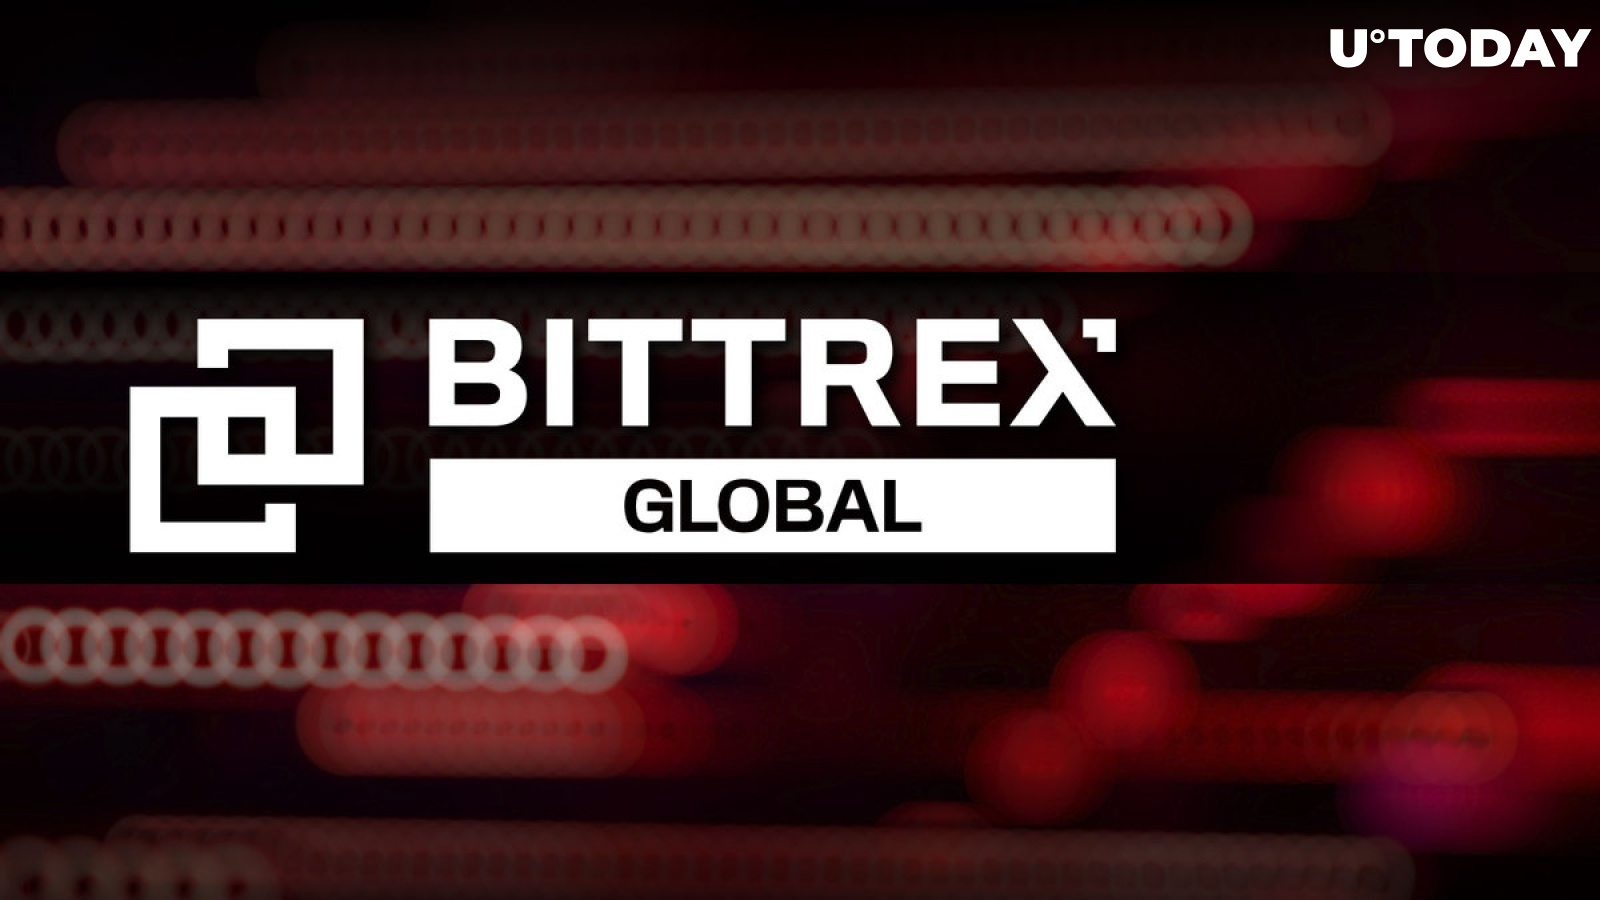 Bittrex (Volume ??): Volume Prices and trading pairs available >> Stelareum